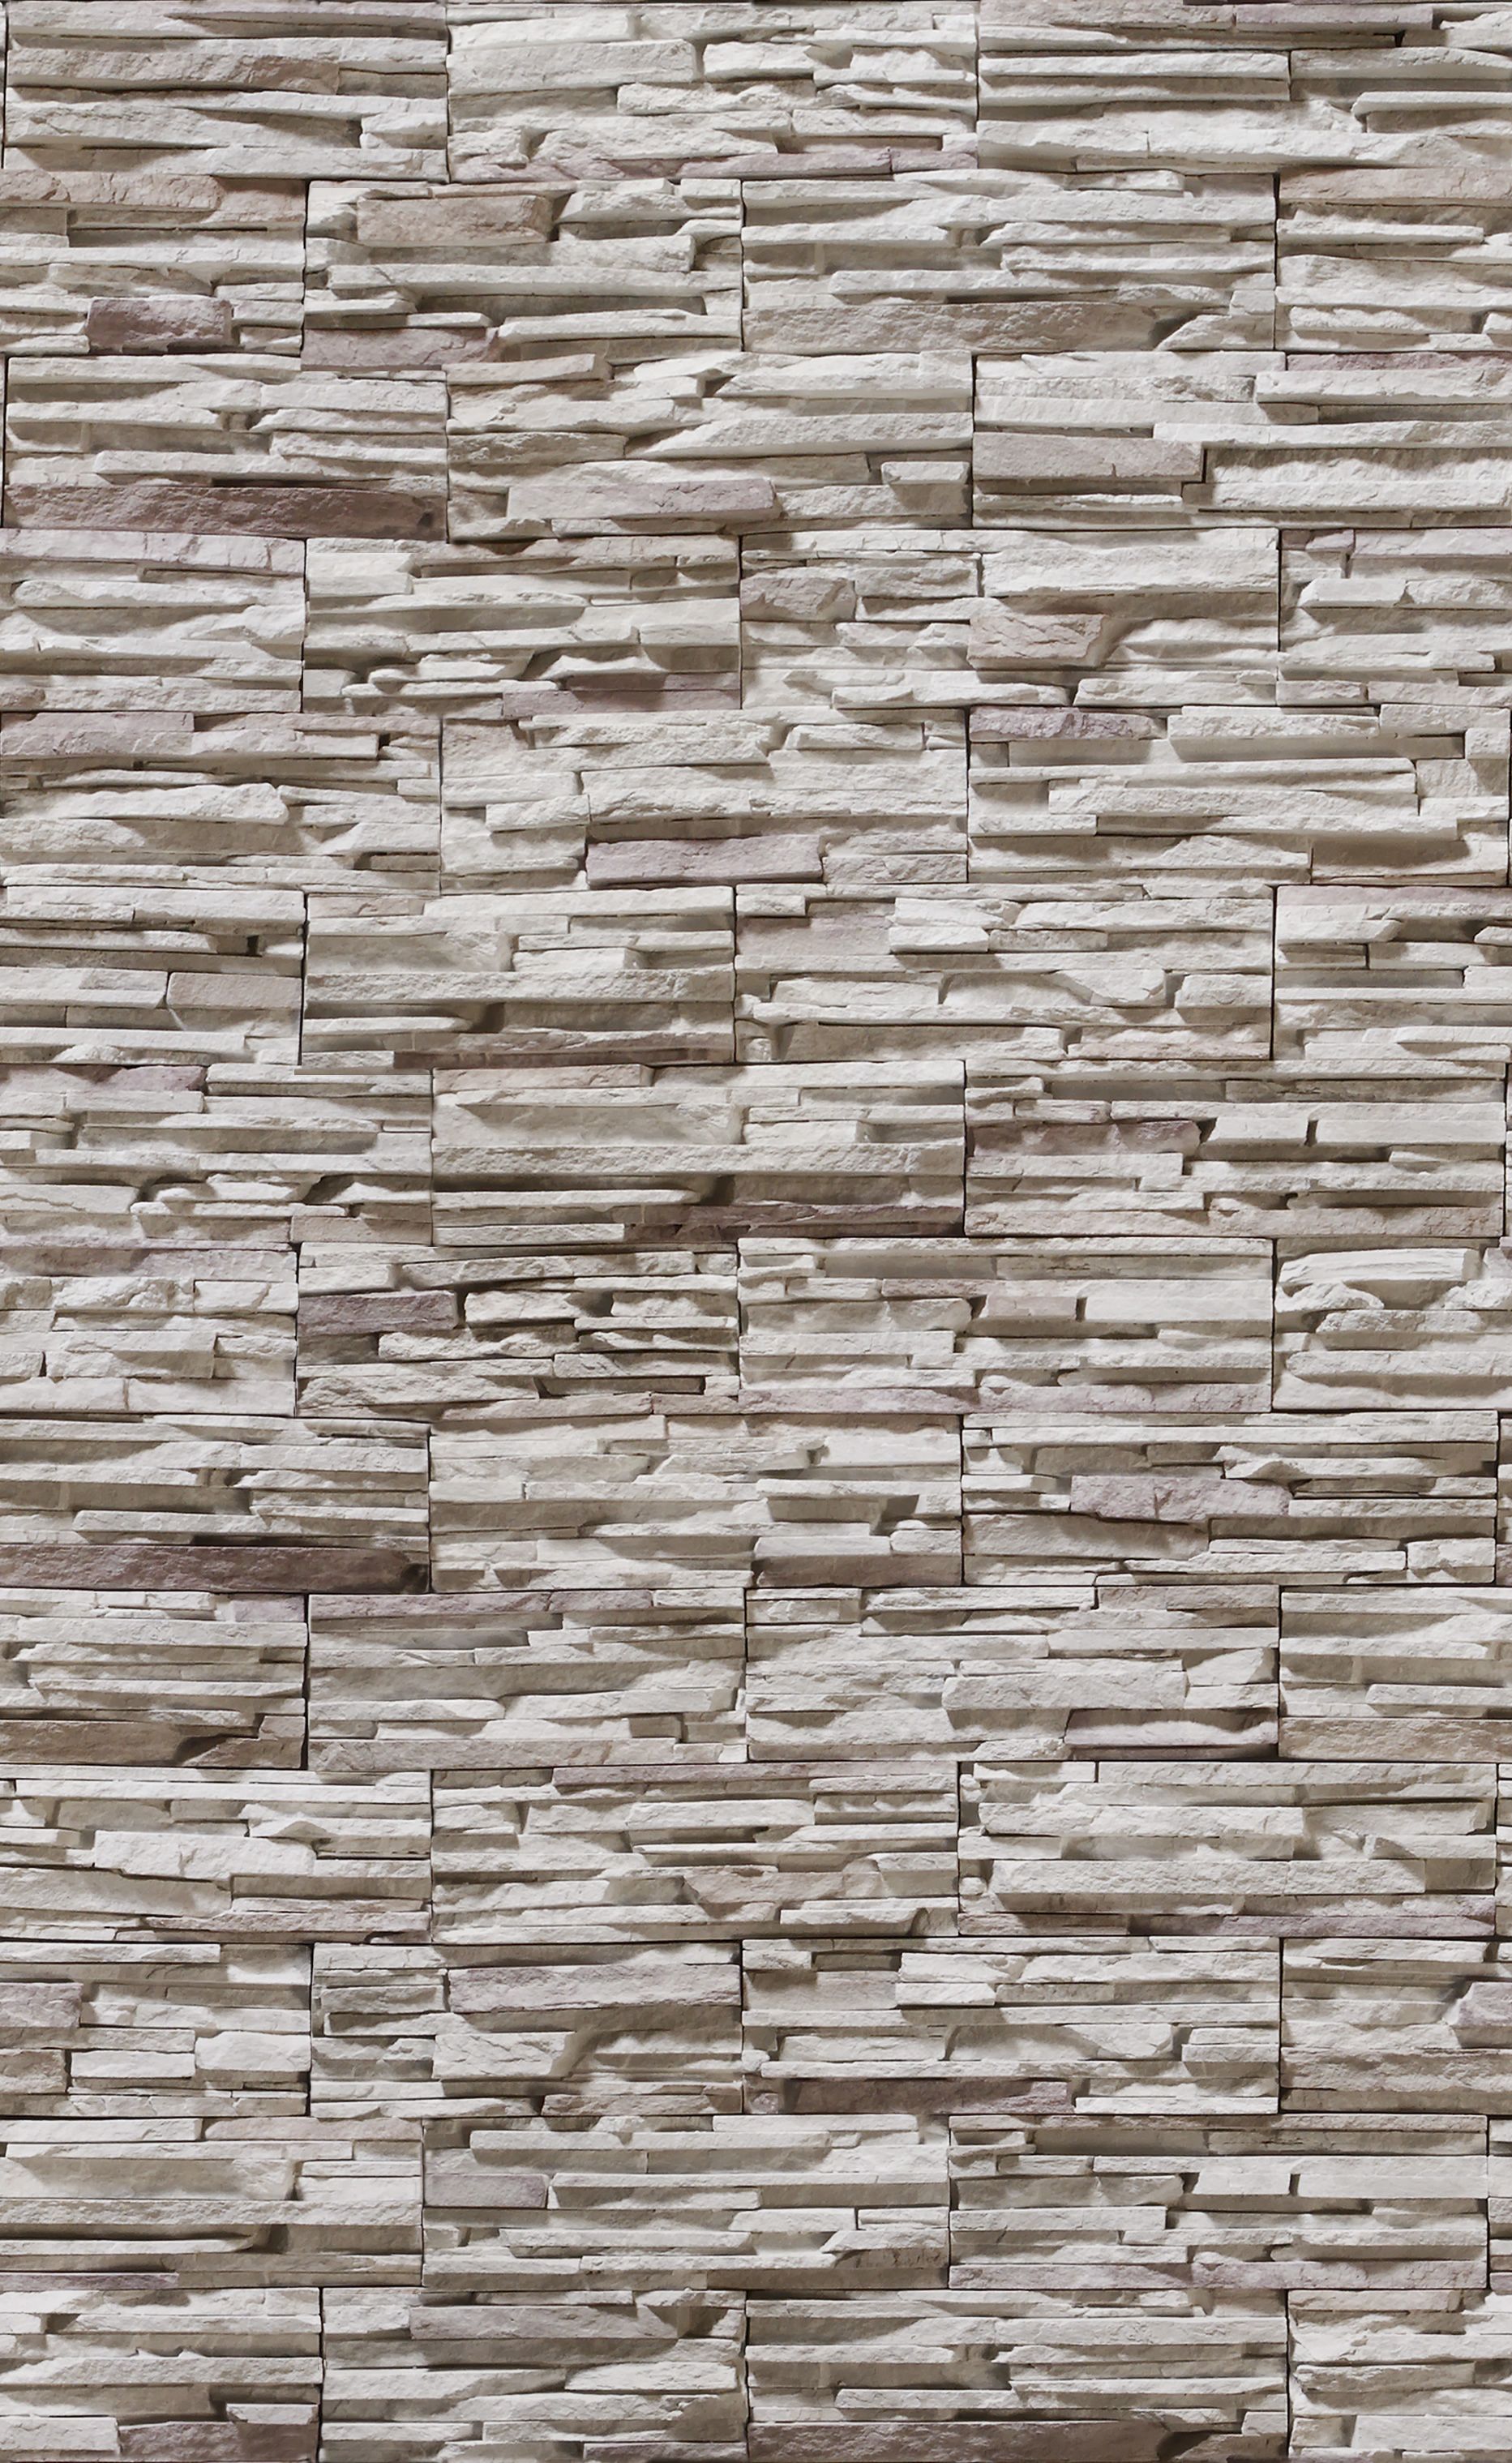 white stone wall texture - Google Search | PATTERN / TEXTURE ...